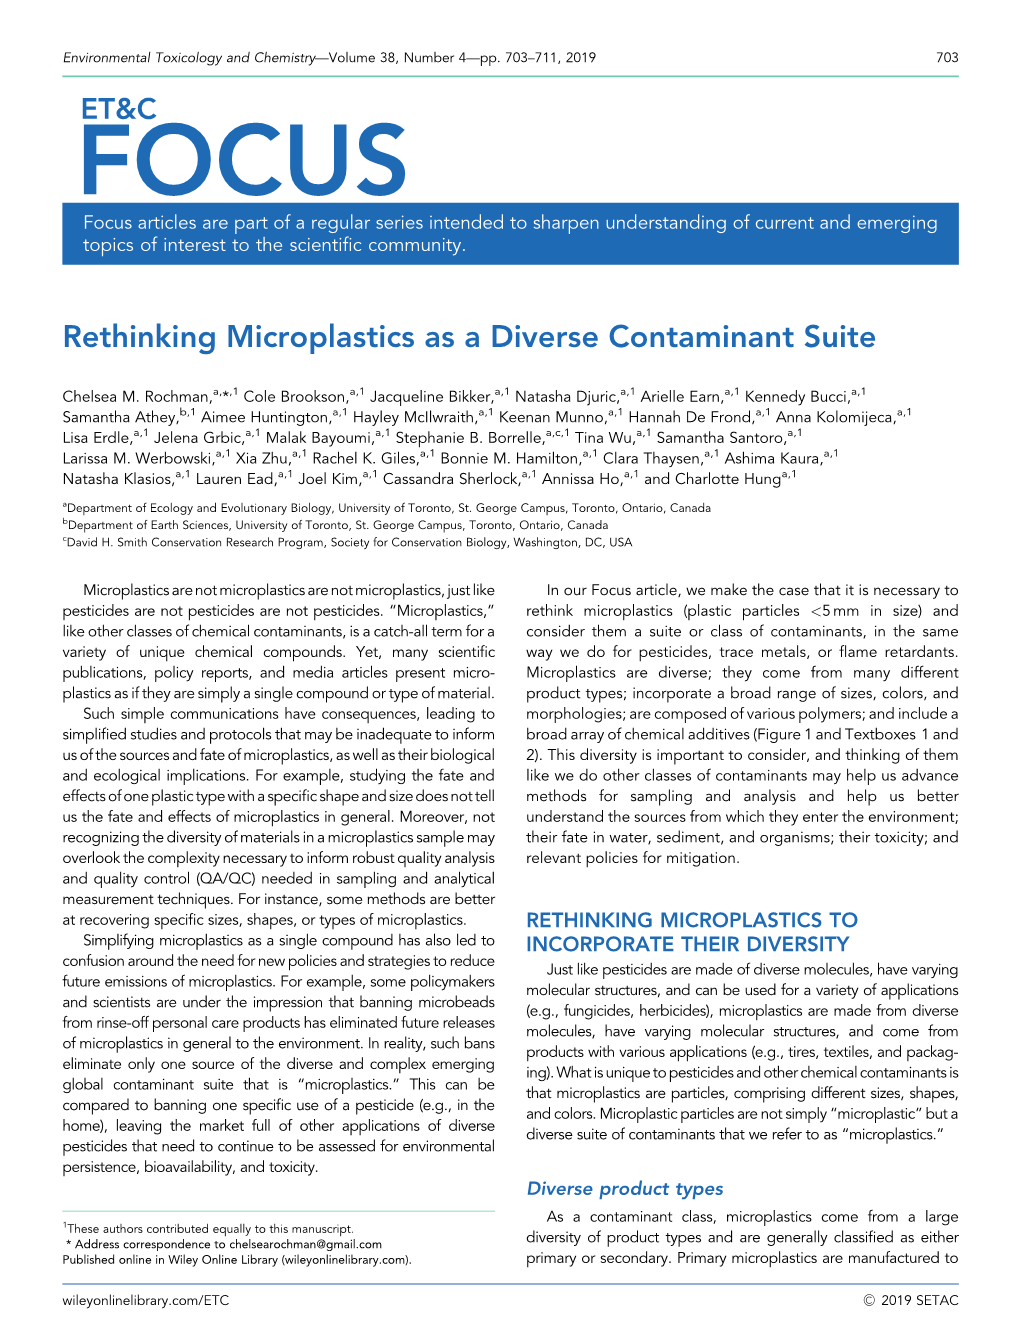 Rethinking Microplastics As a Diverse Contaminant Suite